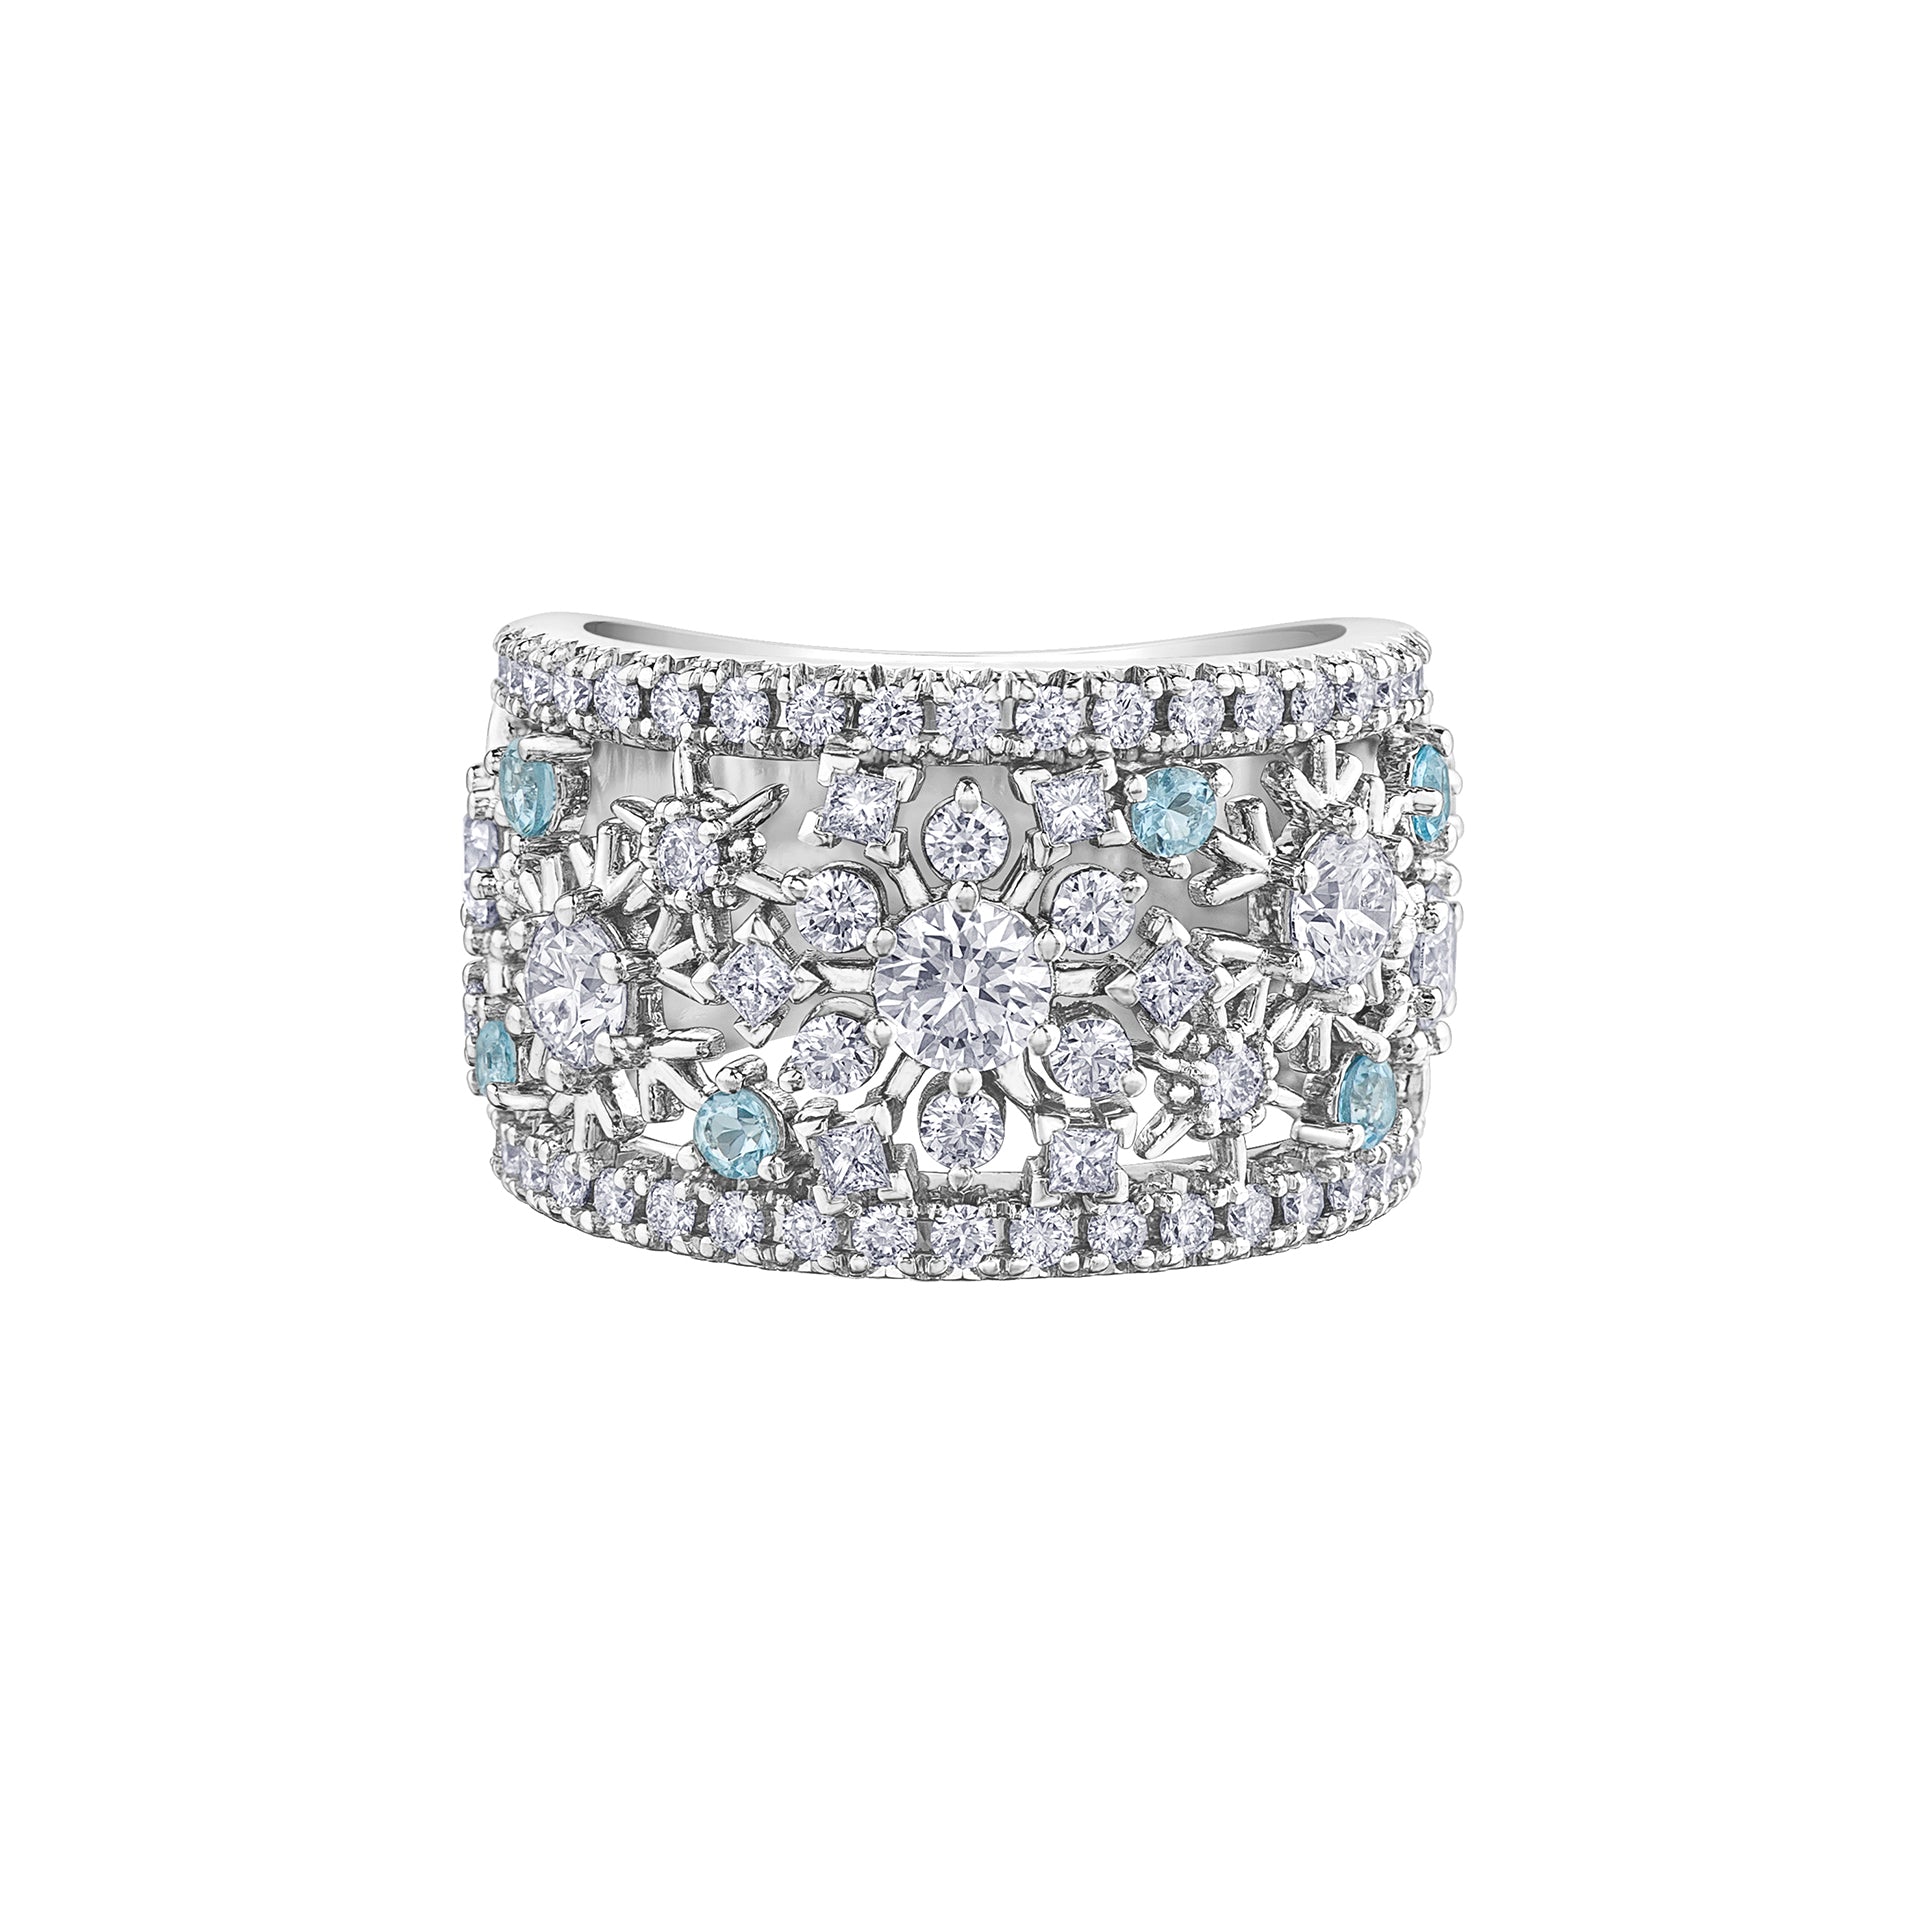 Crafted in 14Kt white Certified Canadian Gold, this ring features snowflakes set with round brilliant-cut Canadian diamonds and round-cut aquamarine accents.